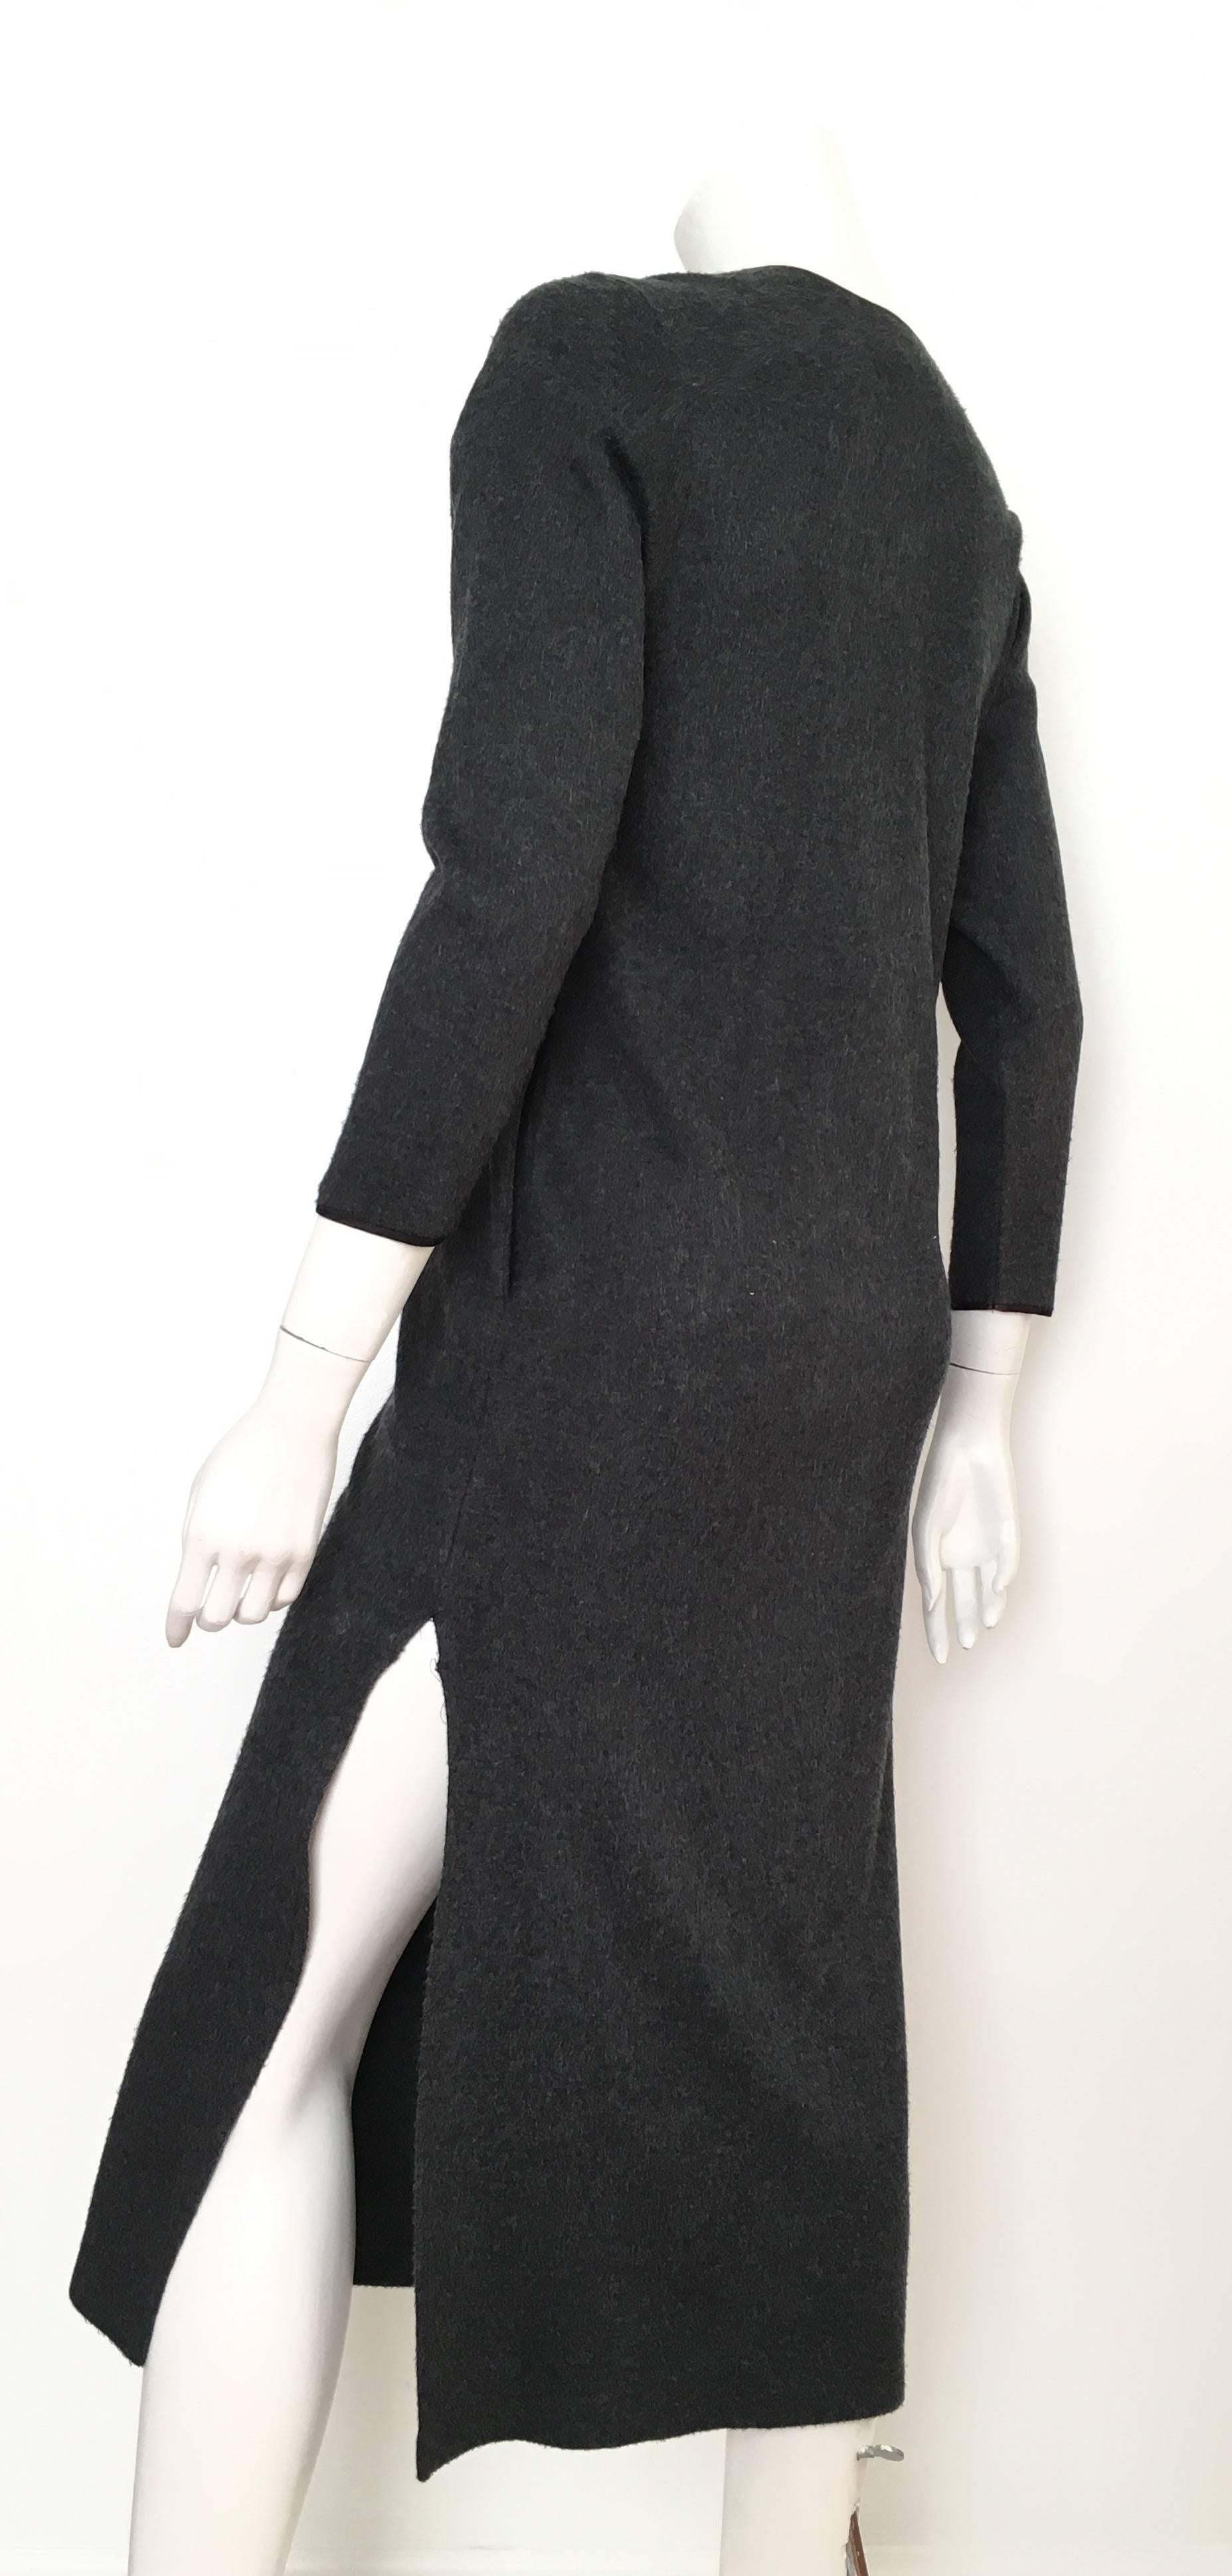 Michael Kors for Saks Fifth Avenue 1980s Grey Flannel Dress with Pockets Size P. For Sale 1